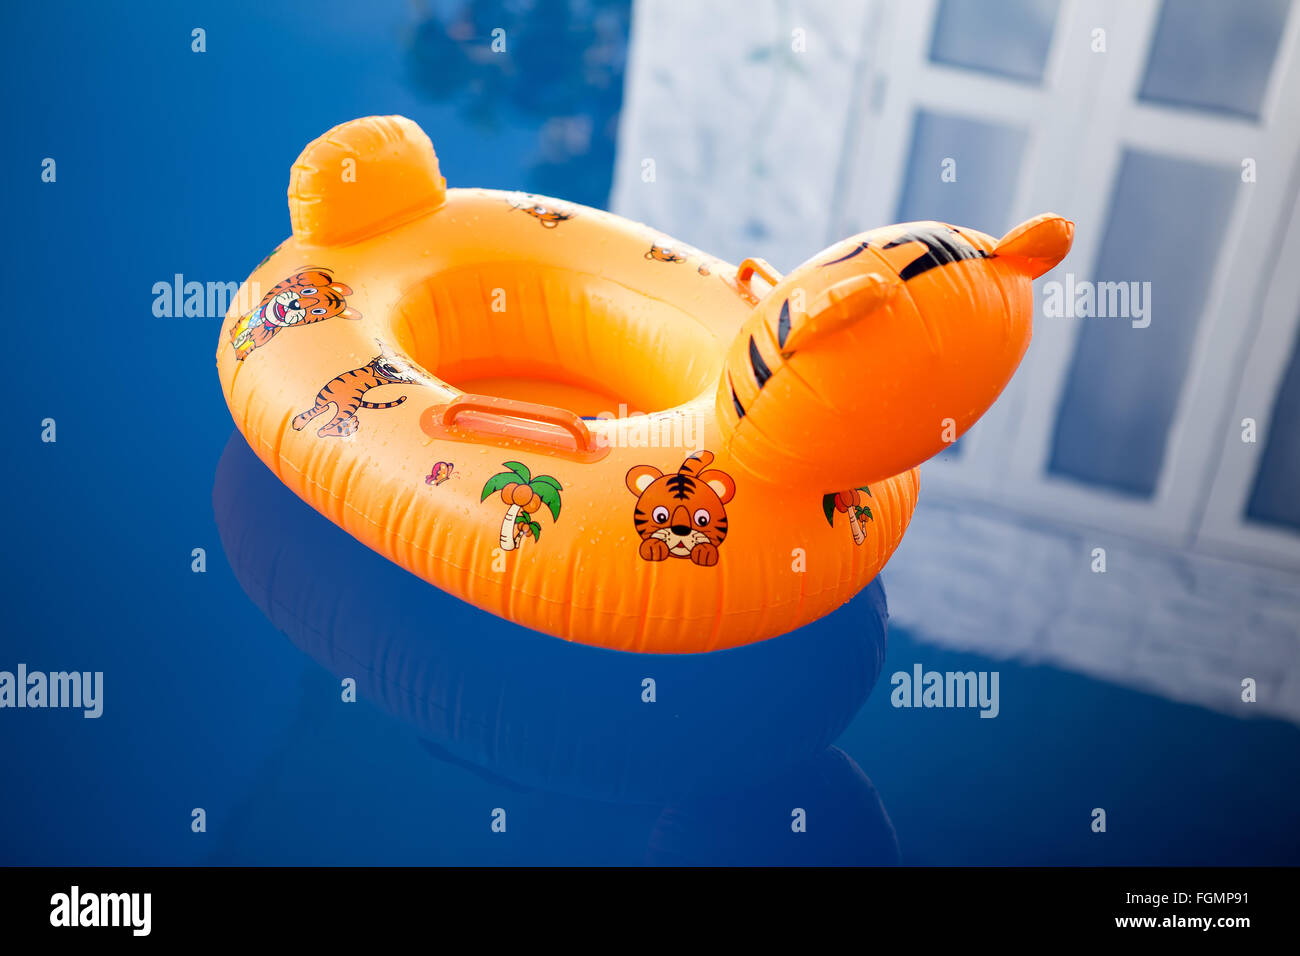 Buy KriToy KriTech Playful Big Animal Inflatable Swim Ring Pool Water Float  for Kids Ages 3-6 Years Old Monkey (Brown) Online at Low Prices in India -  Amazon.in